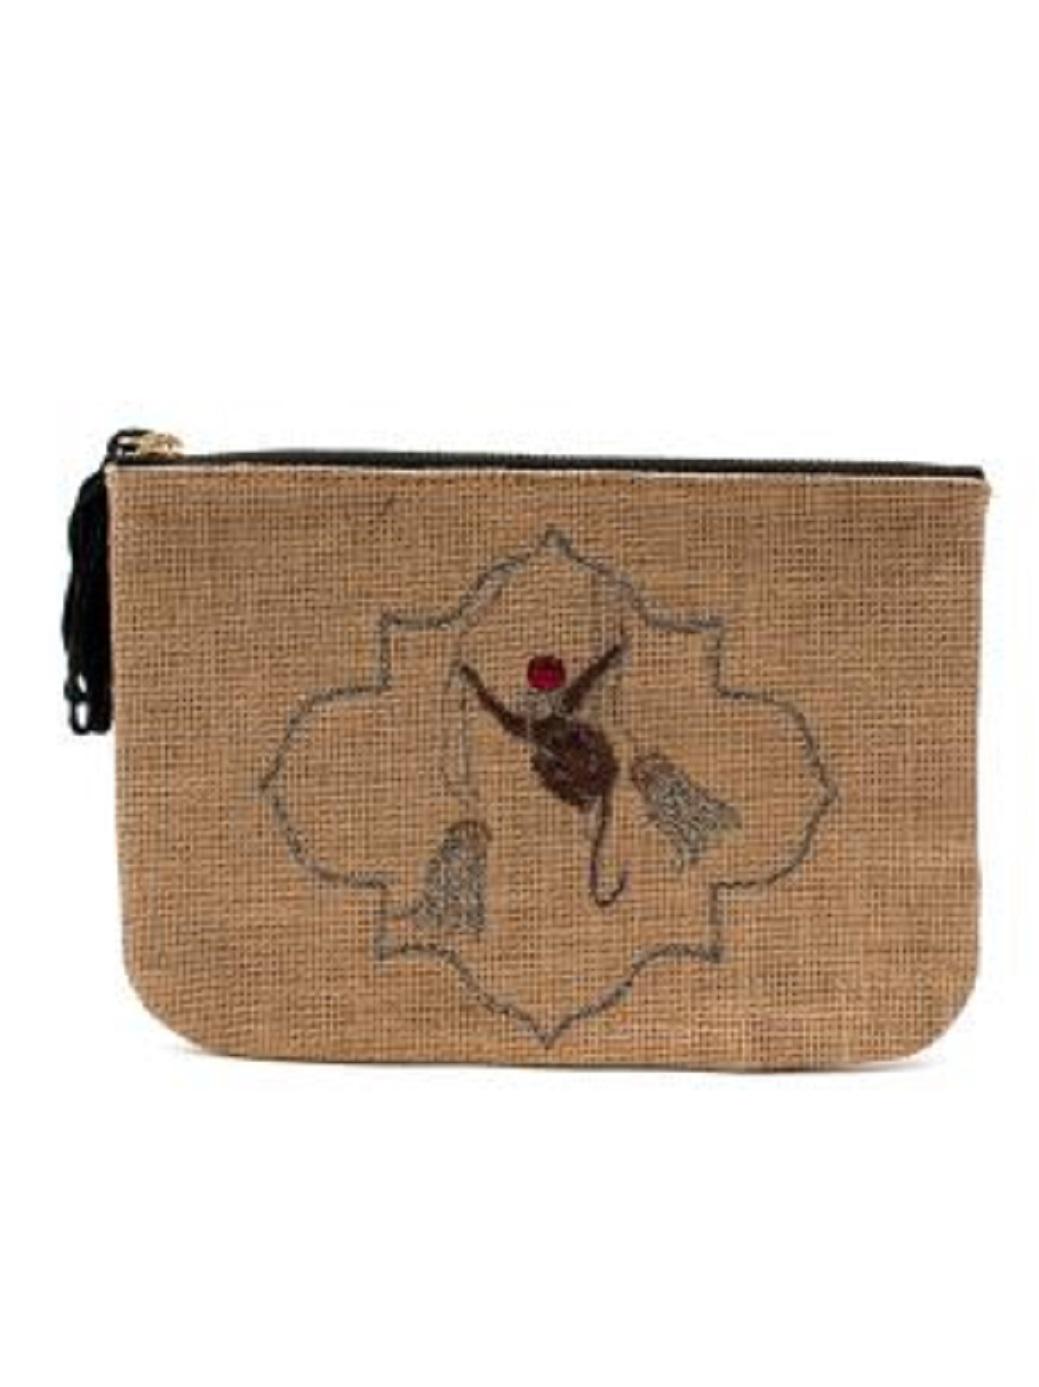 Mehry Mu Embroidered Beach Clutch 

- Woven raffia clutch bag with metallic monkey embroidered motif on one side and banana on the other 
- Black fabric and gold tone zip at the top opening 
- Suede tassel keychain
- Black leather interior